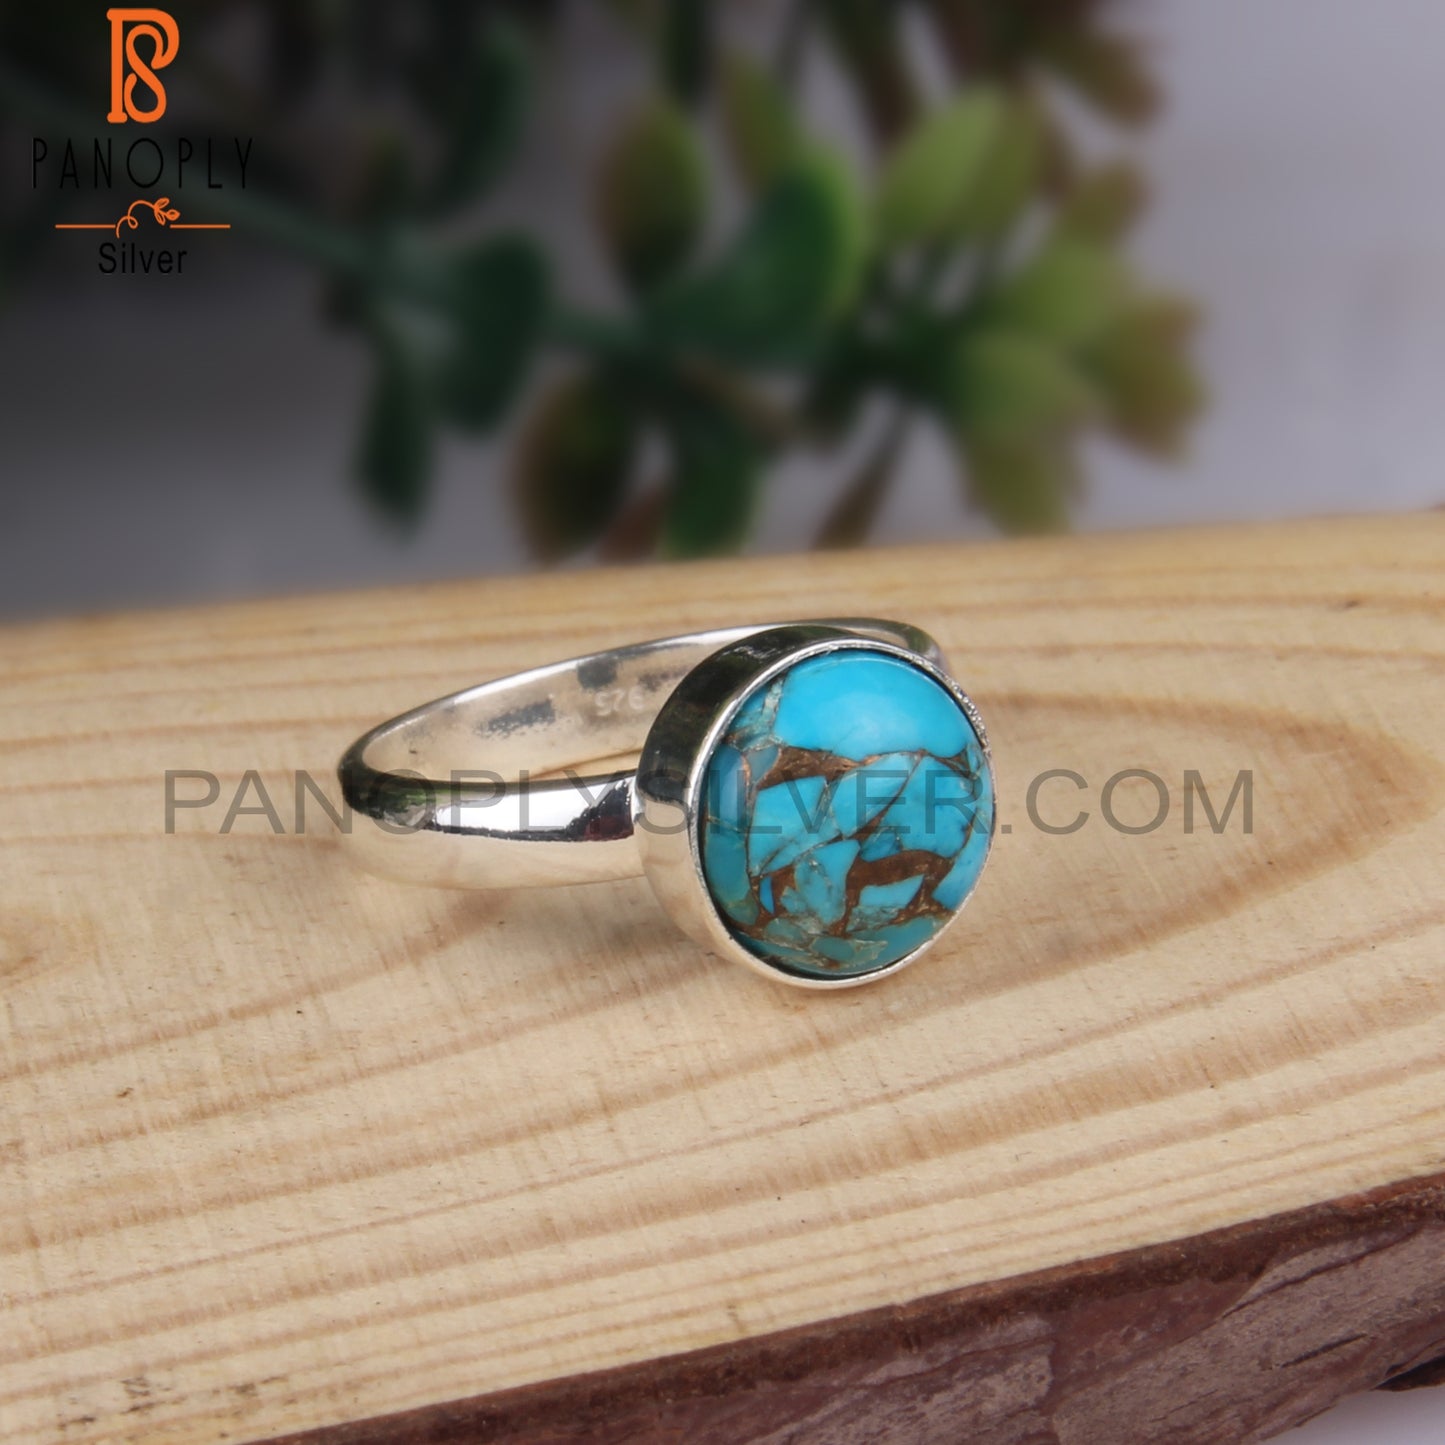 Mojave Copper Turquoise Stone 925 Silver Dainty Ring